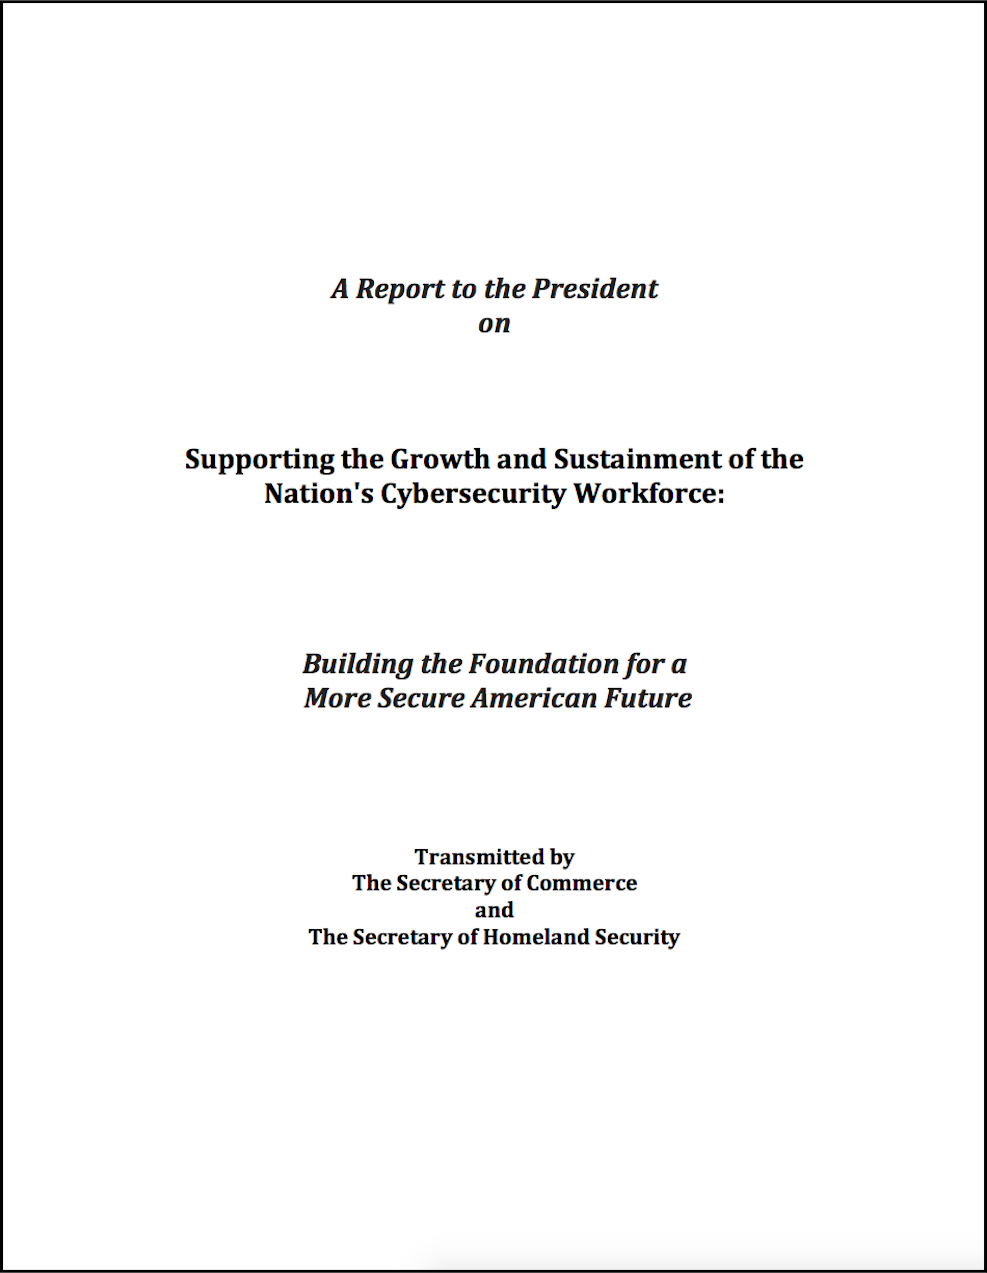 image_front page of report